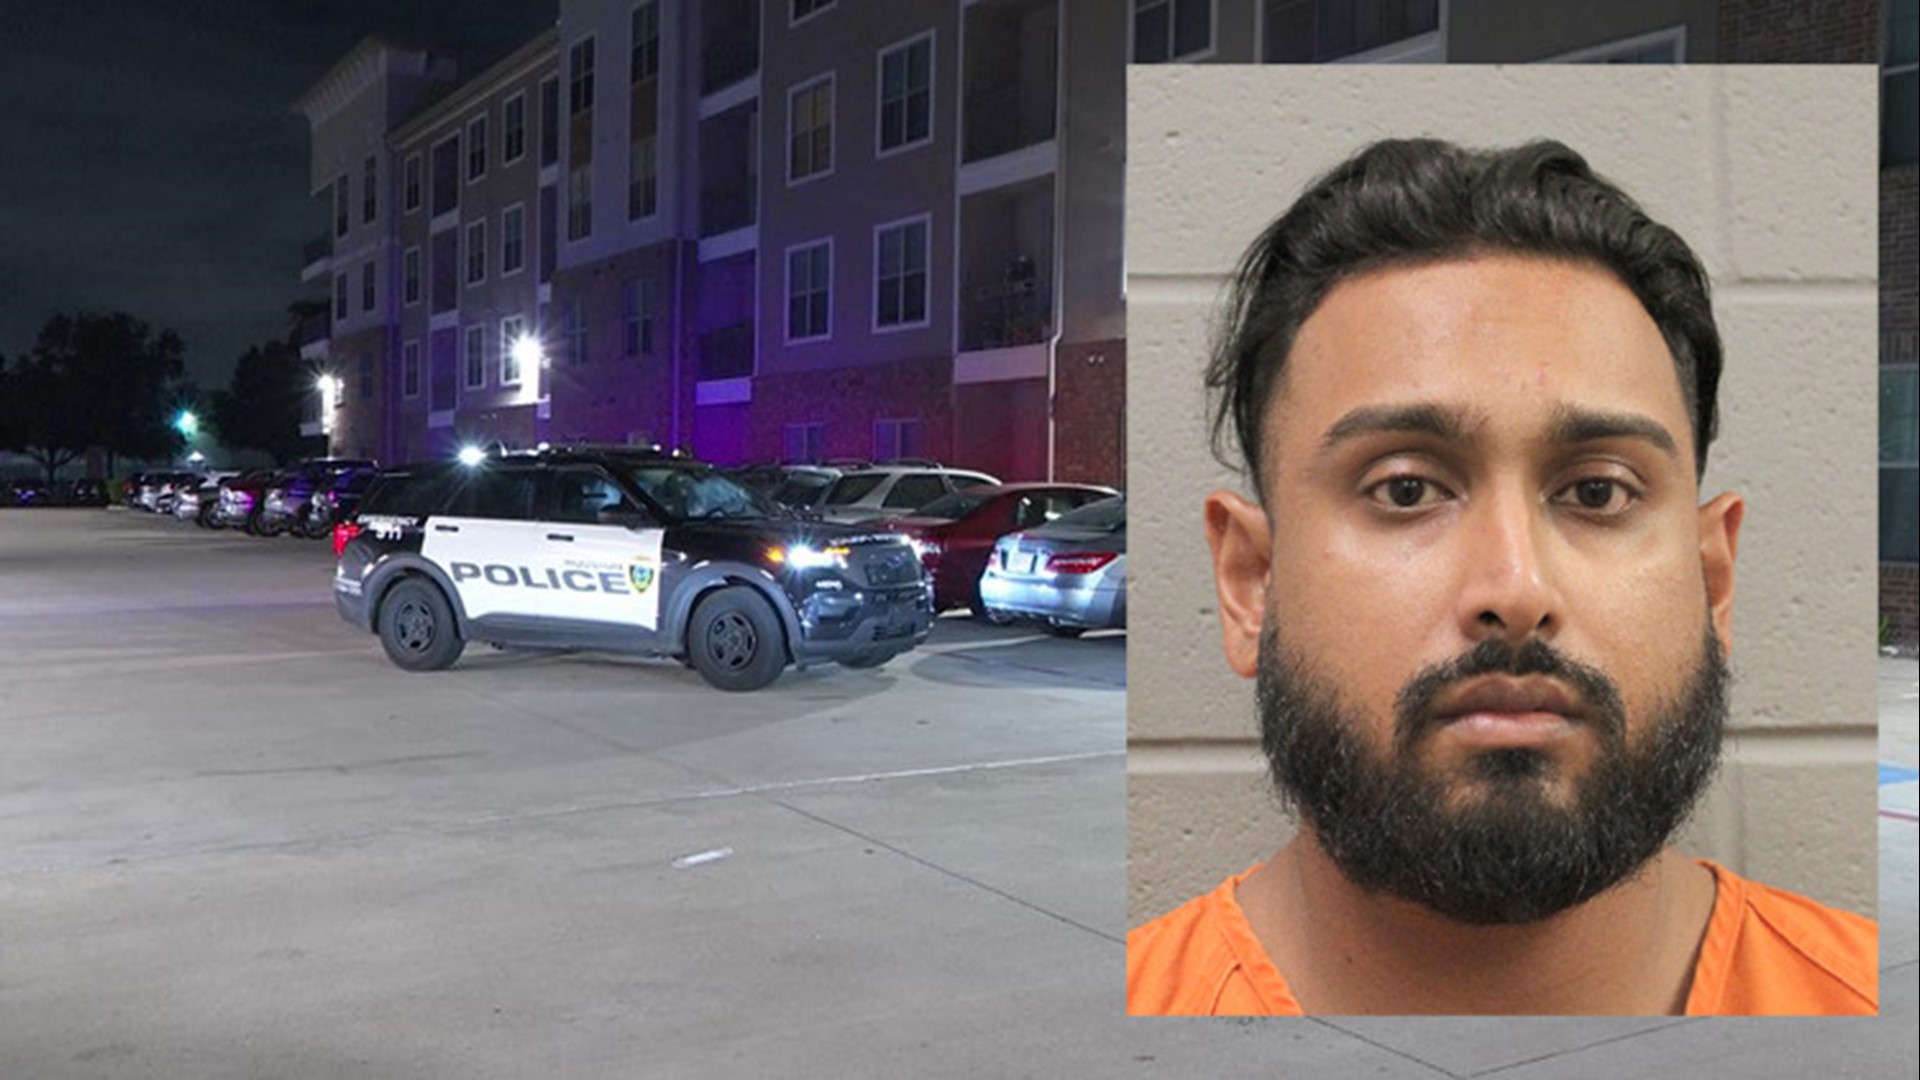 Investigators think Galib Waheed Chowdhury, 31, shot his wife during a domestic violence incident. HPD Chief Troy Finner said he was immediately fired.